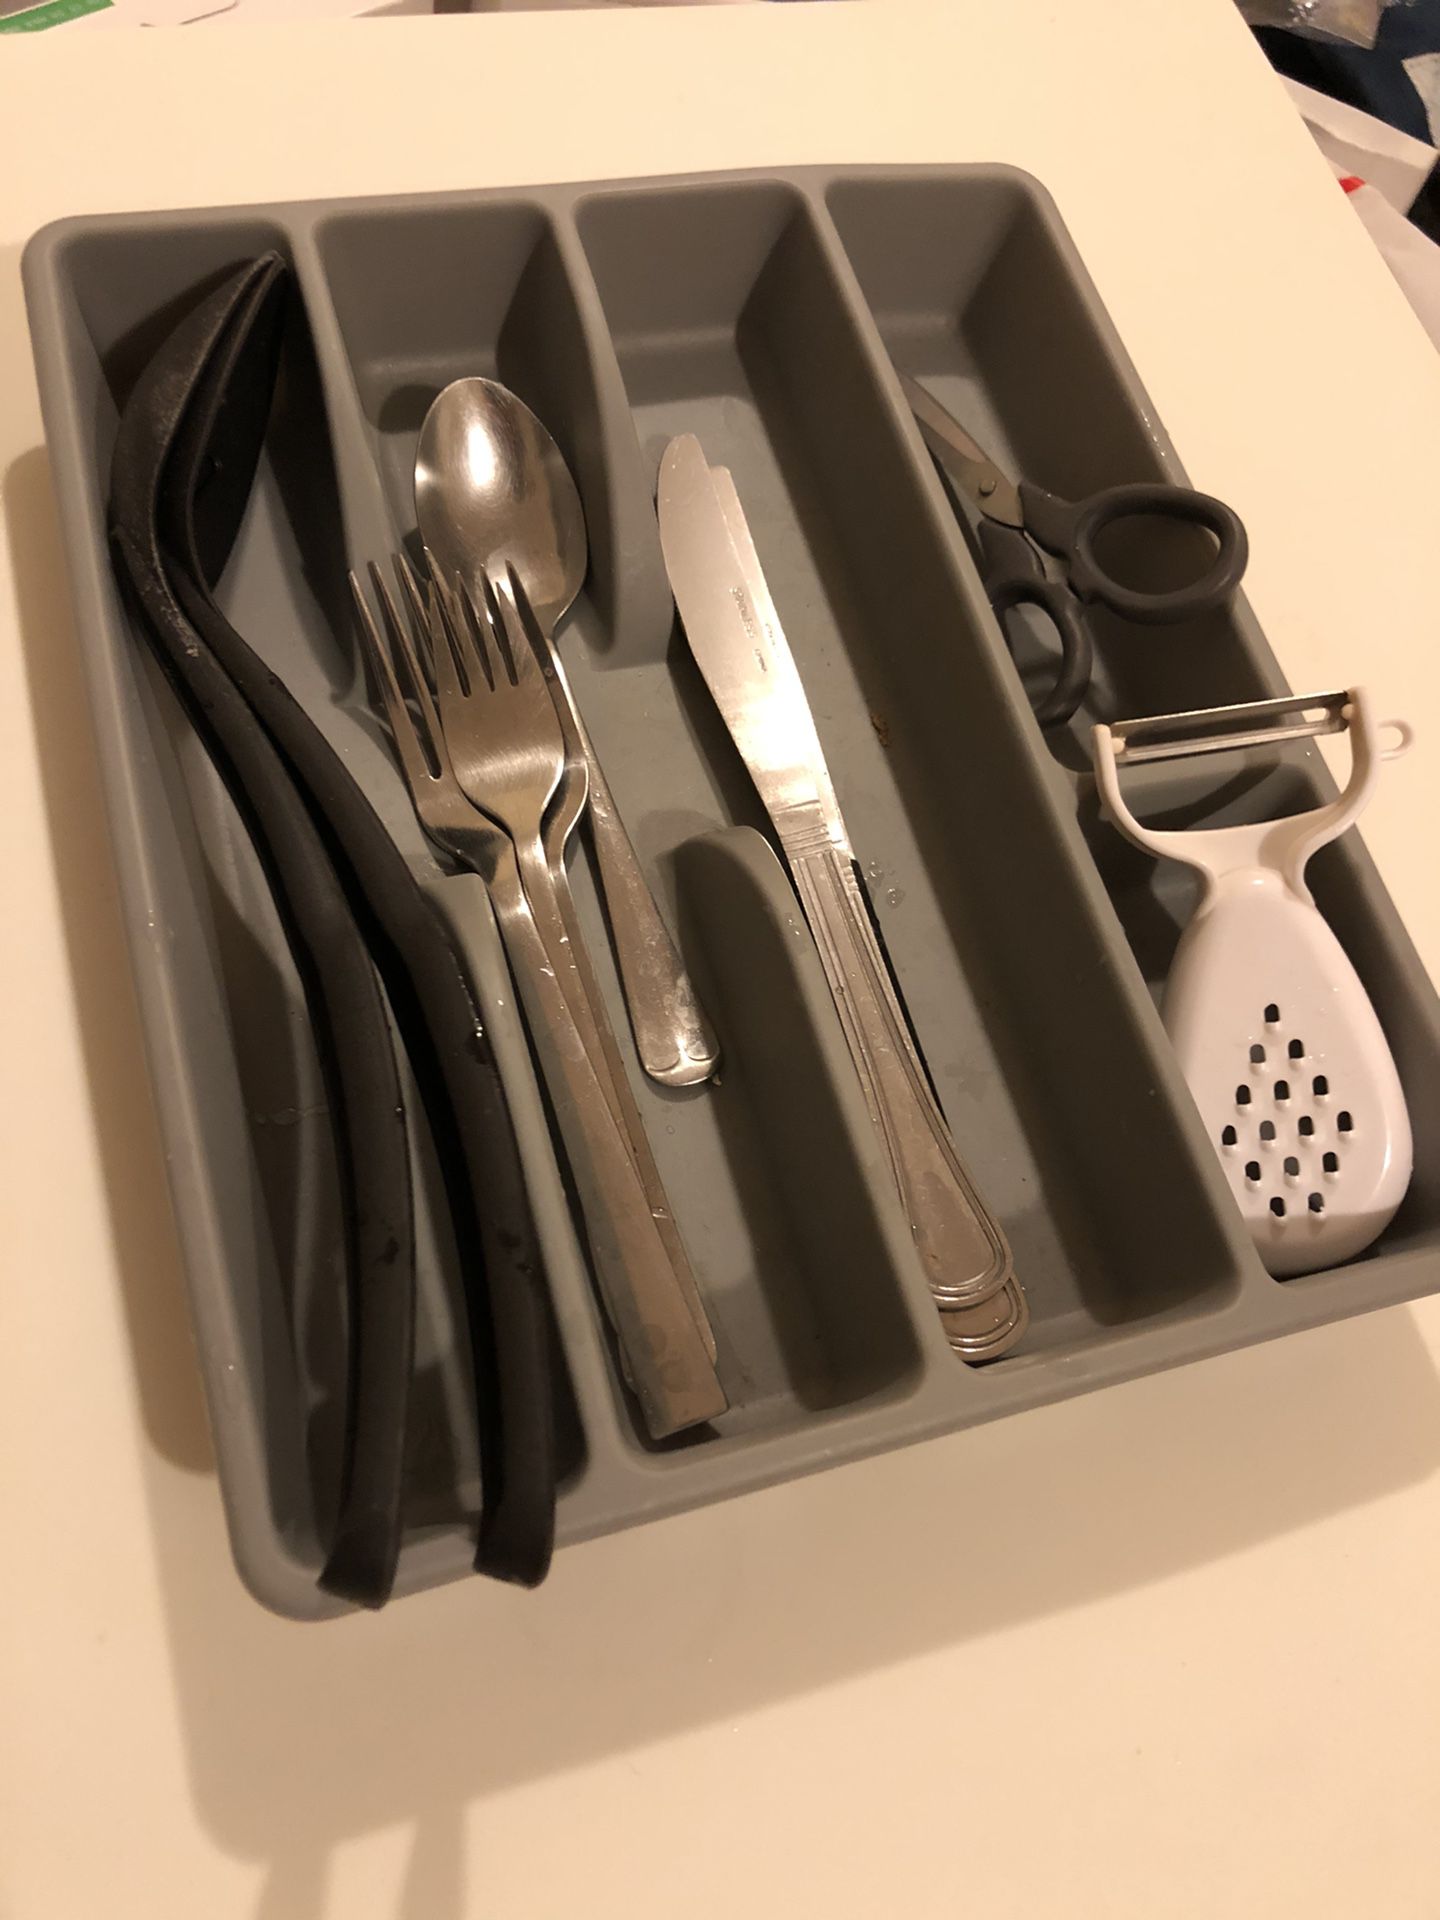 Utensils (3 forks, 3 knife, a spoon, scissor and peeler and 2 new pairs of long and small chopsticks) with utensils tray